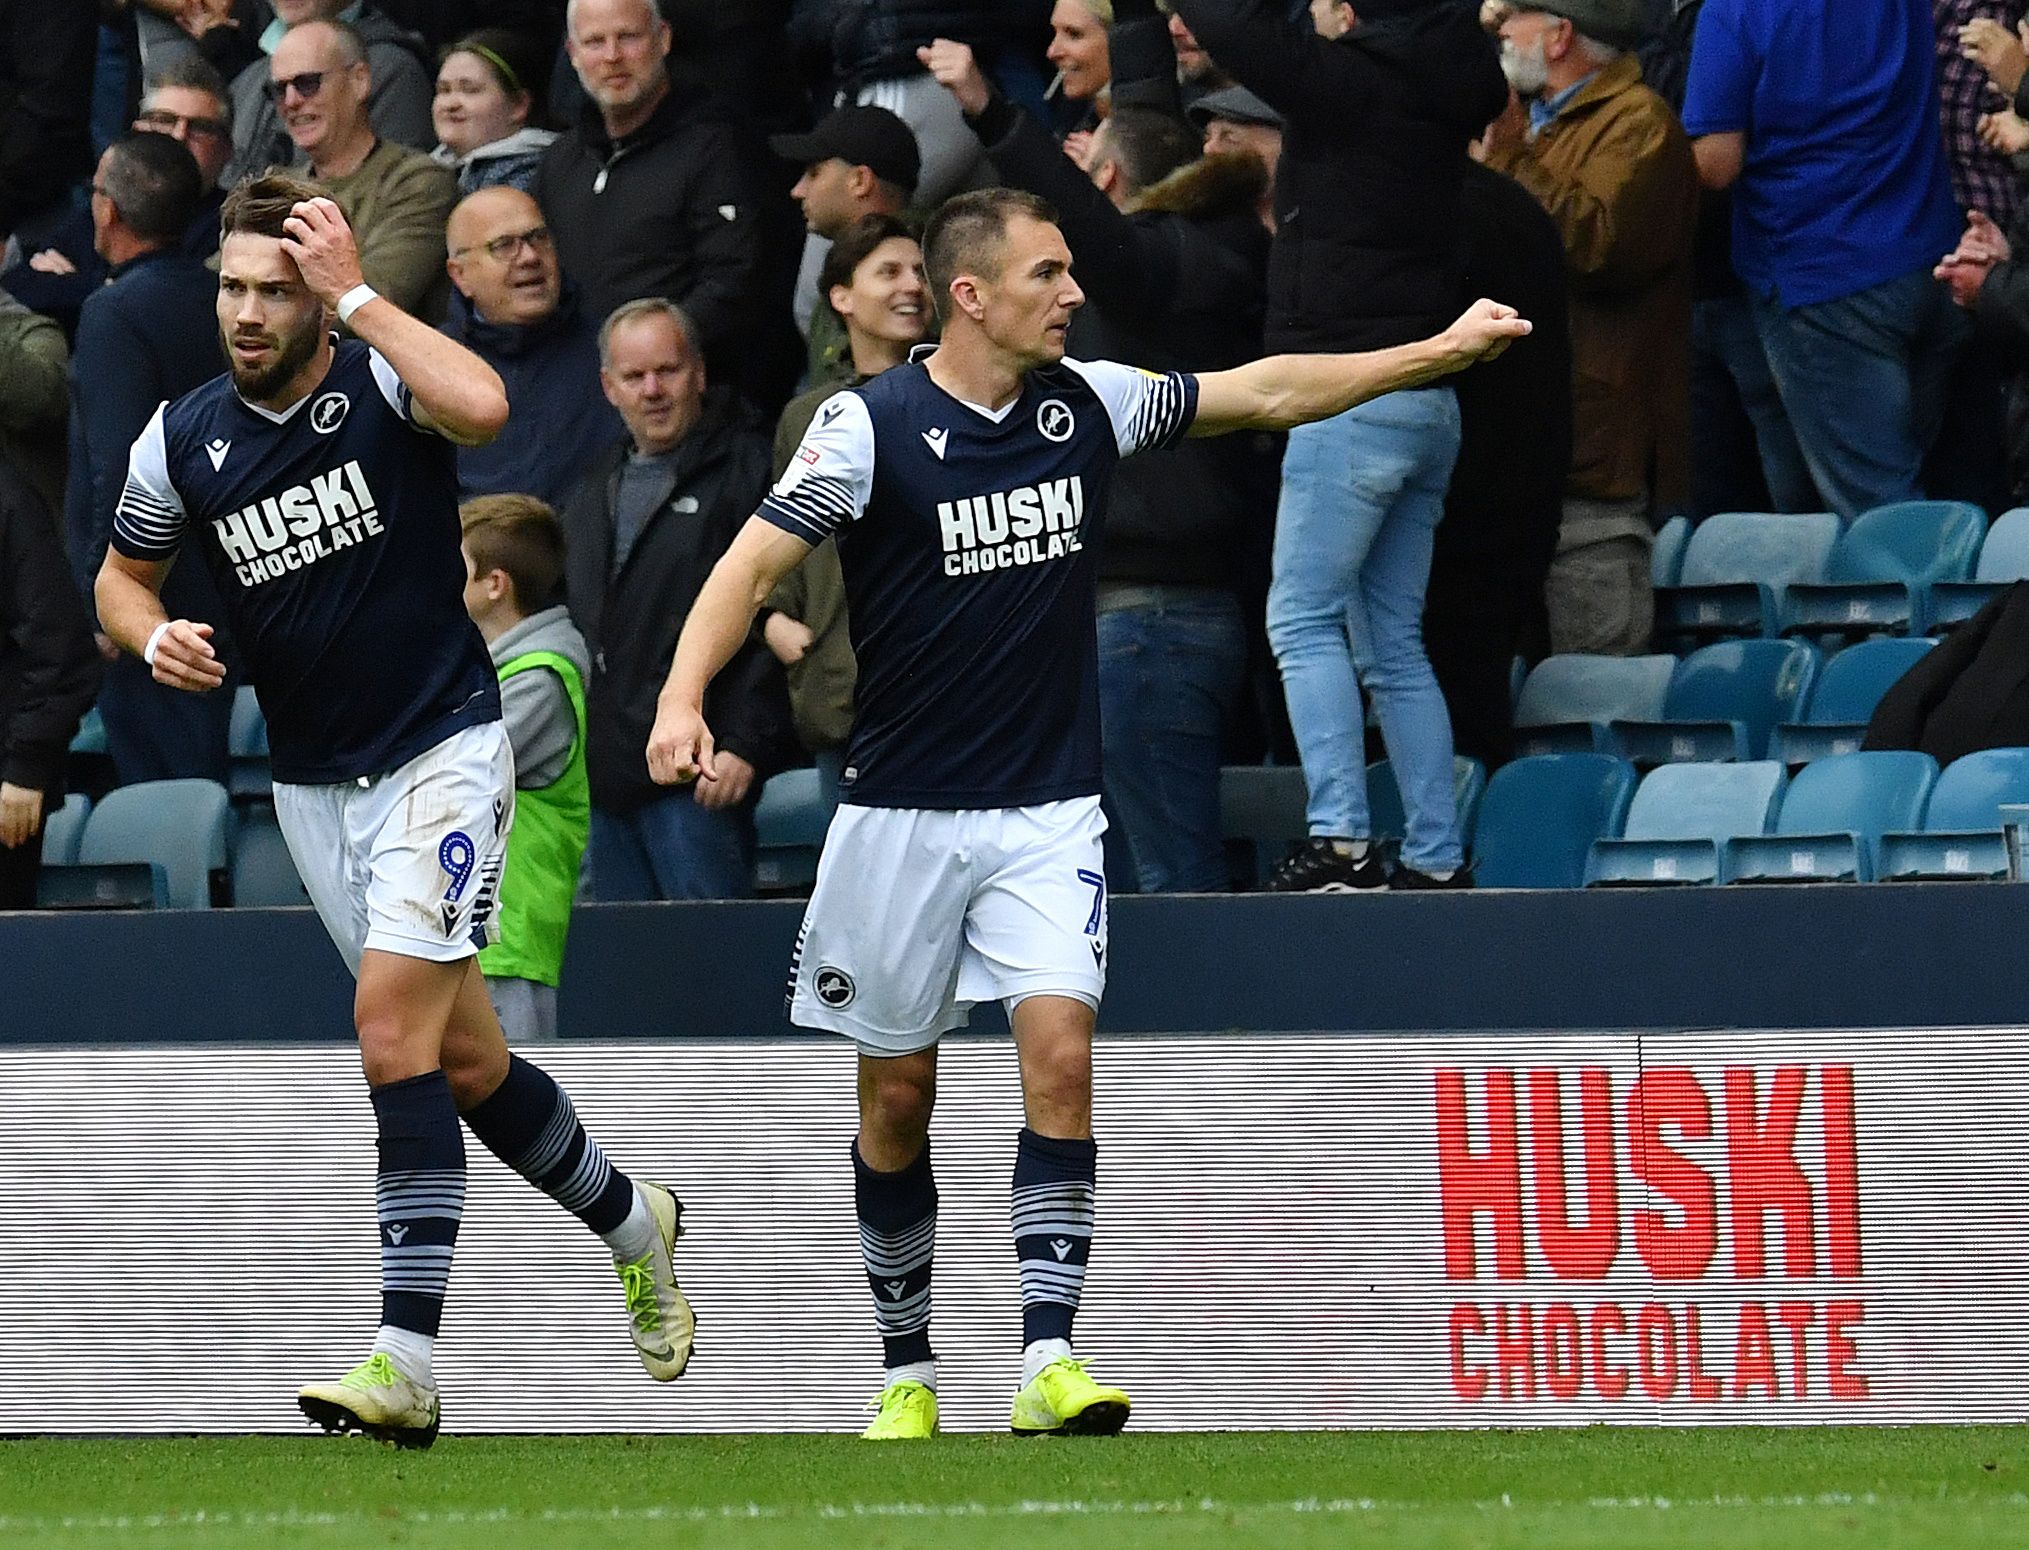 Soccer Football - Championship - Millwall v Leeds United - The Den, London, Britain - October 5, 2019   Millwall's Jed Wallace celebrates scoring their first goal   Action Images/Alan Walter    EDITORIAL USE ONLY. No use with unauthorized audio, video, data, fixture lists, club/league logos or 